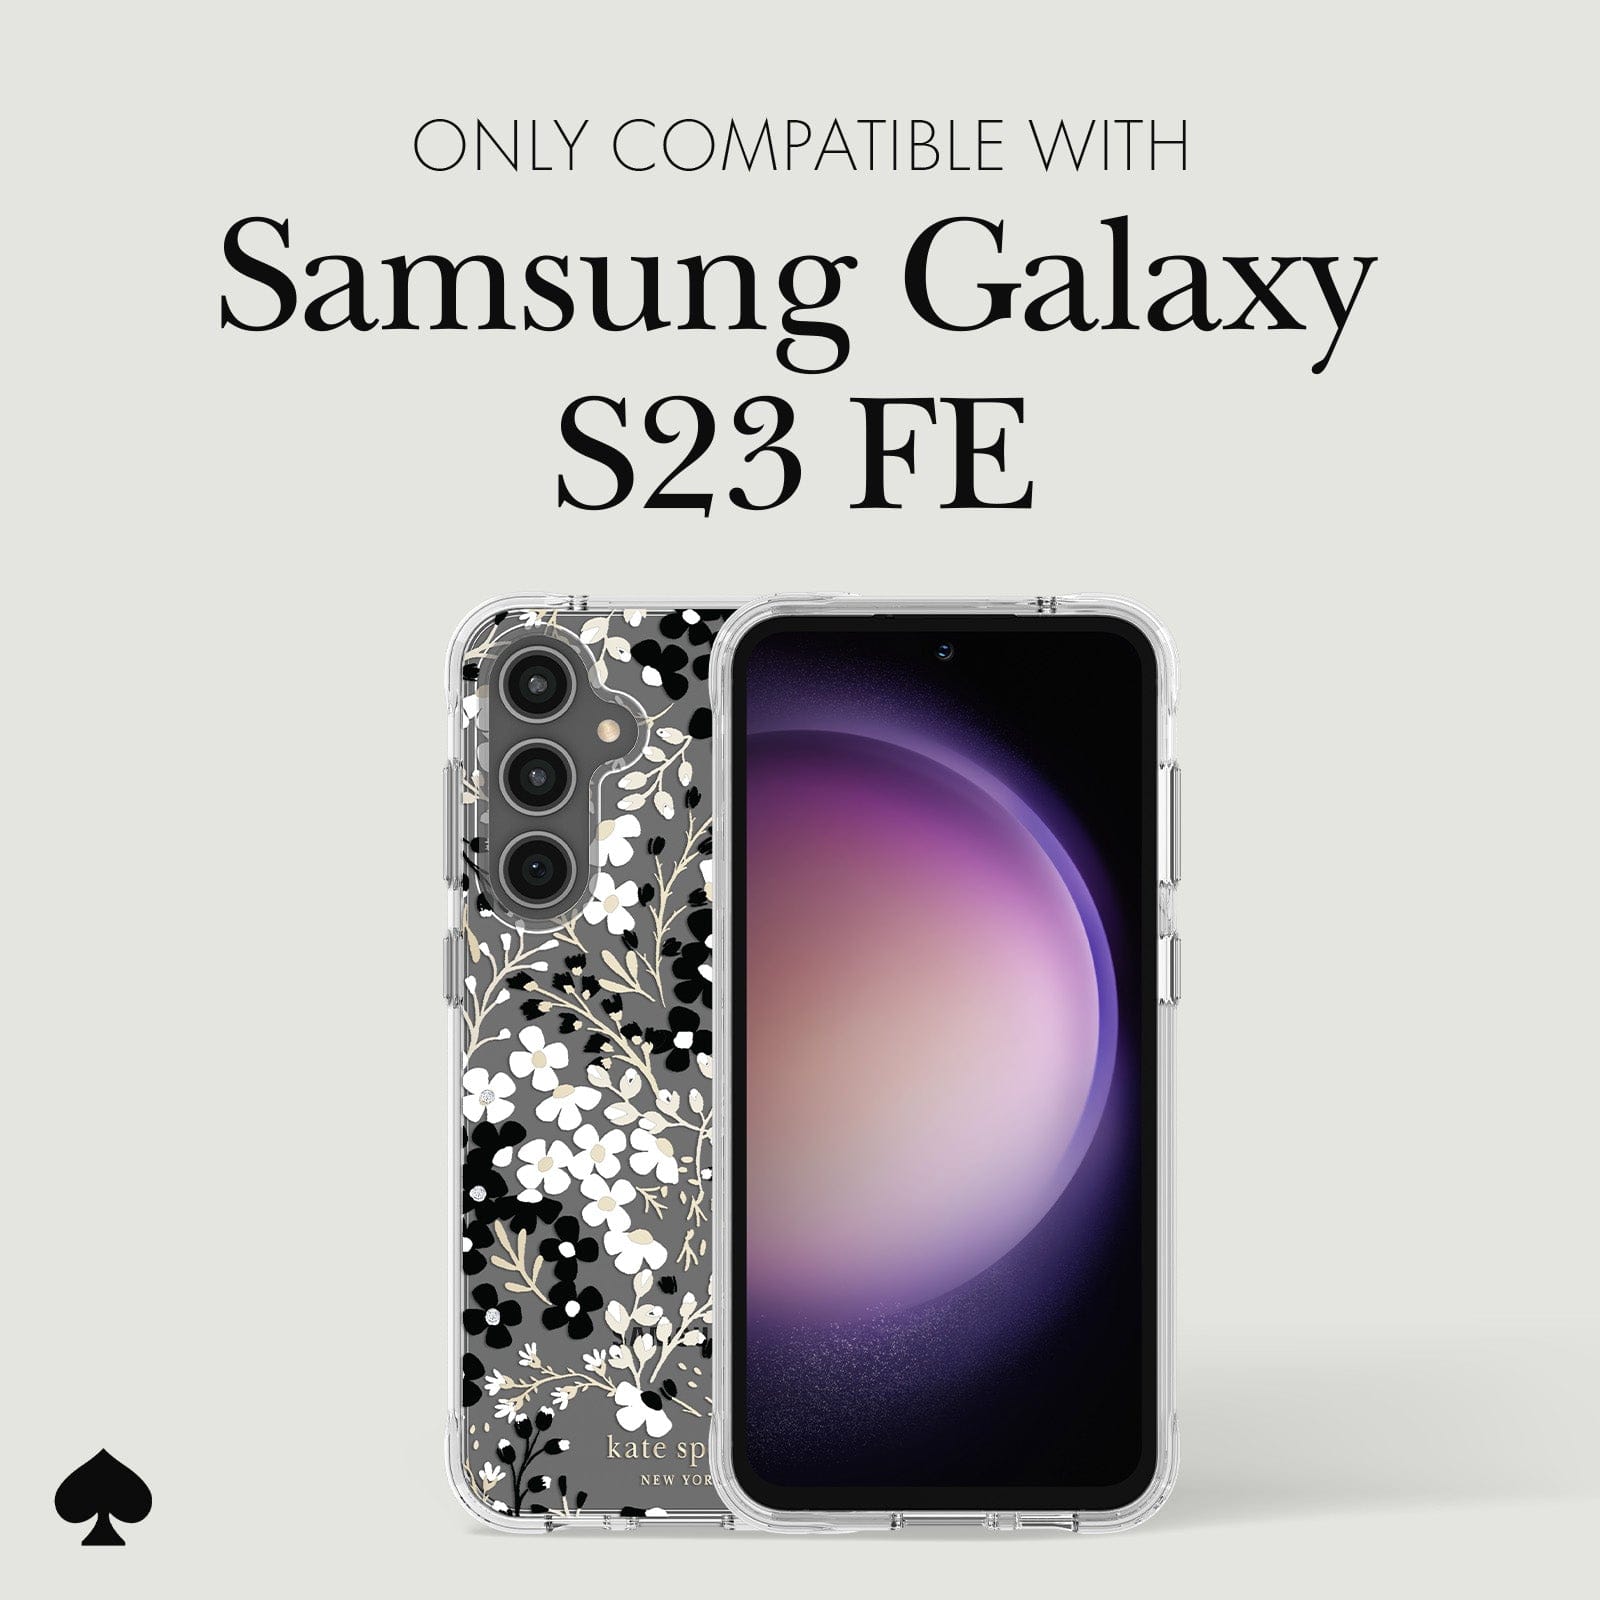 ONLY COMPATIBLE WITH SAMSUNG GALAXY S23 FE